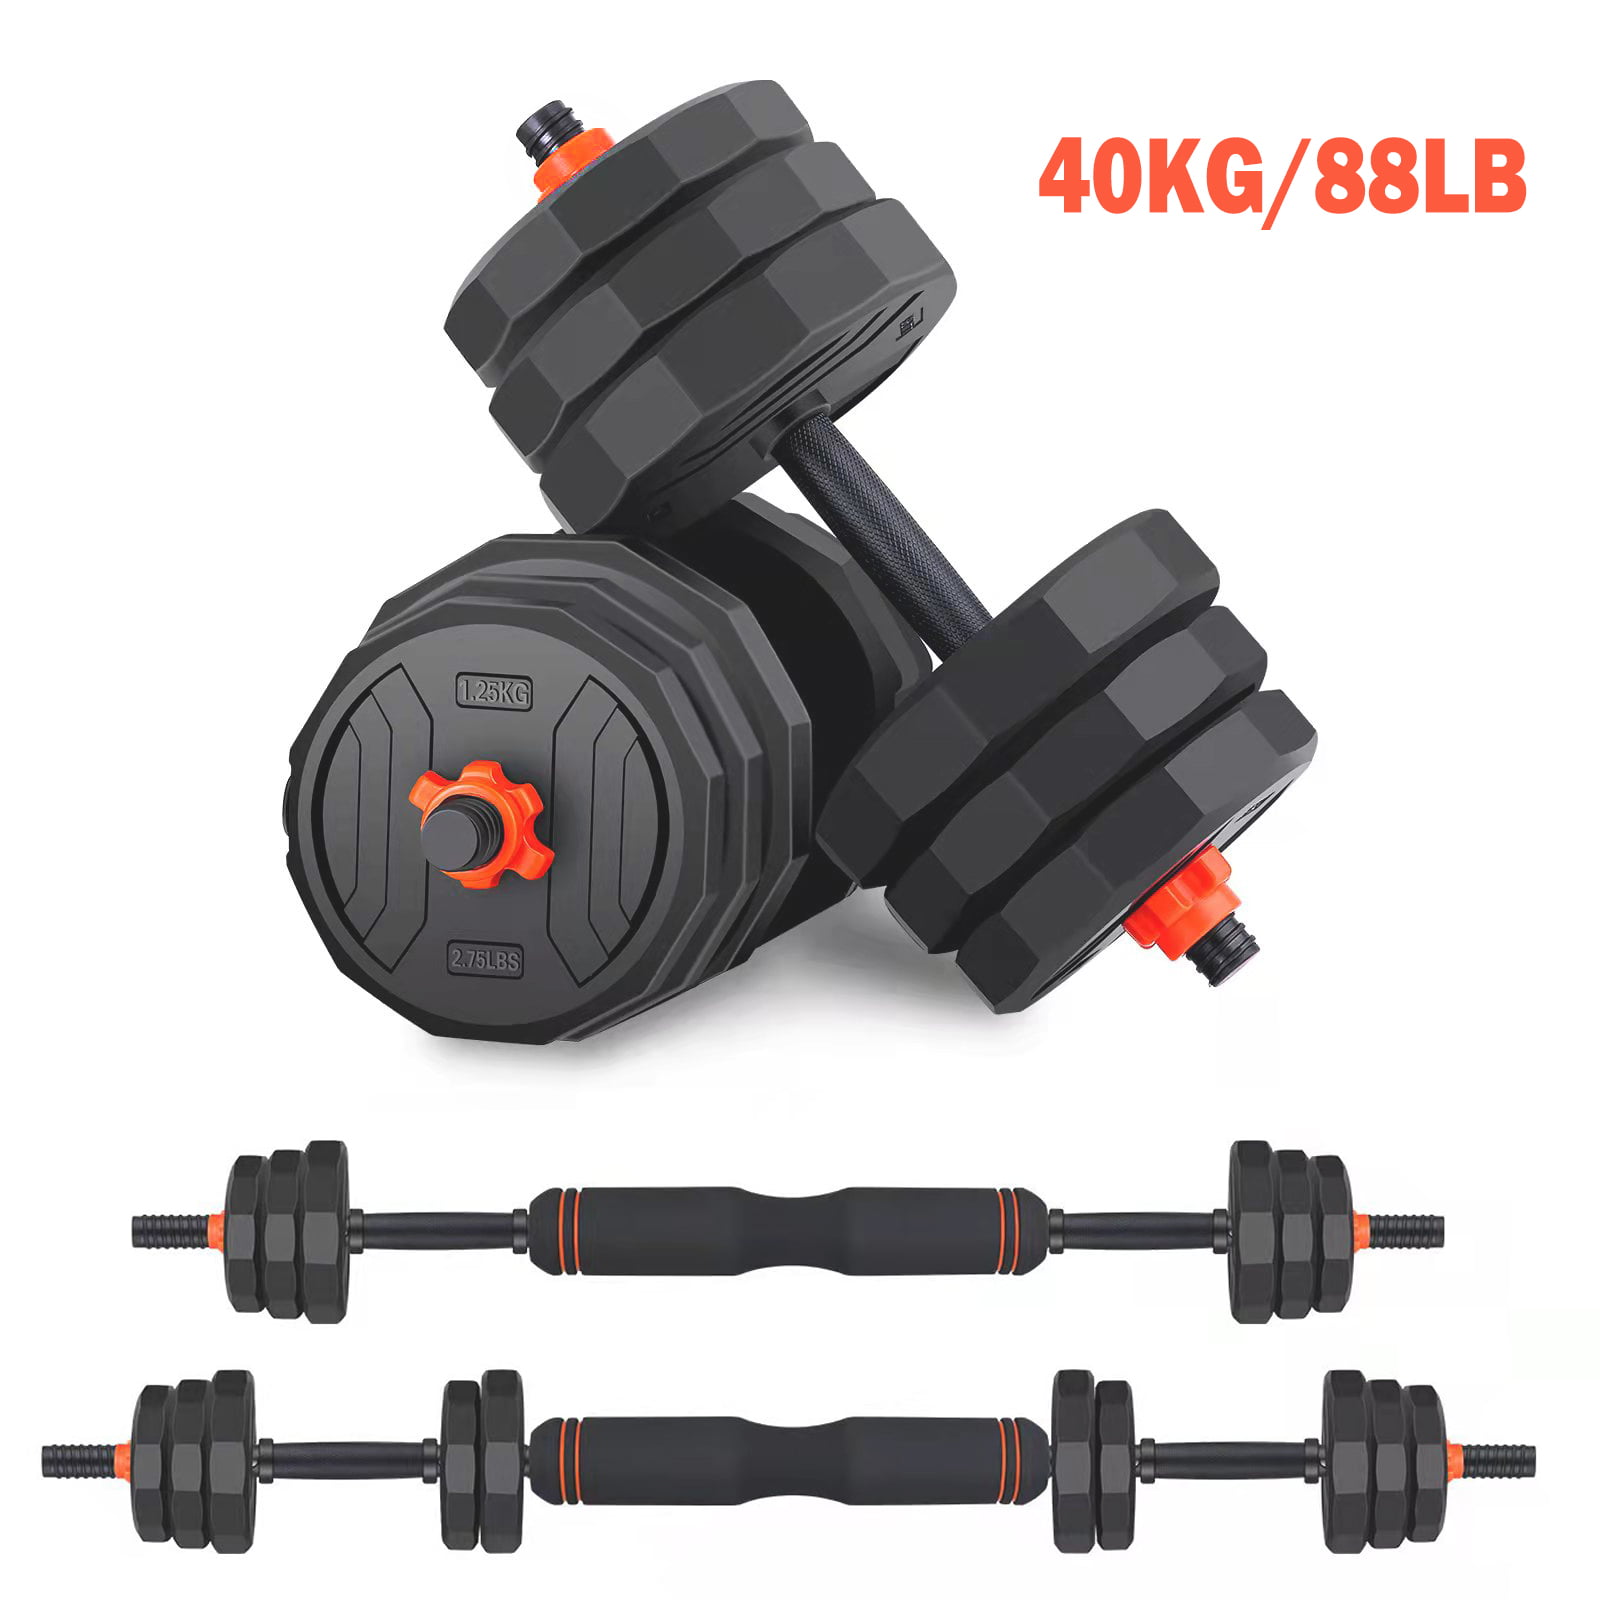 Suitable for Home or Gym Exercise YIZHIHUA Dumbbell Set,Two-in-One 20/30kg Adjustable Dumbbells-Barbell Weights Set for Men and Women